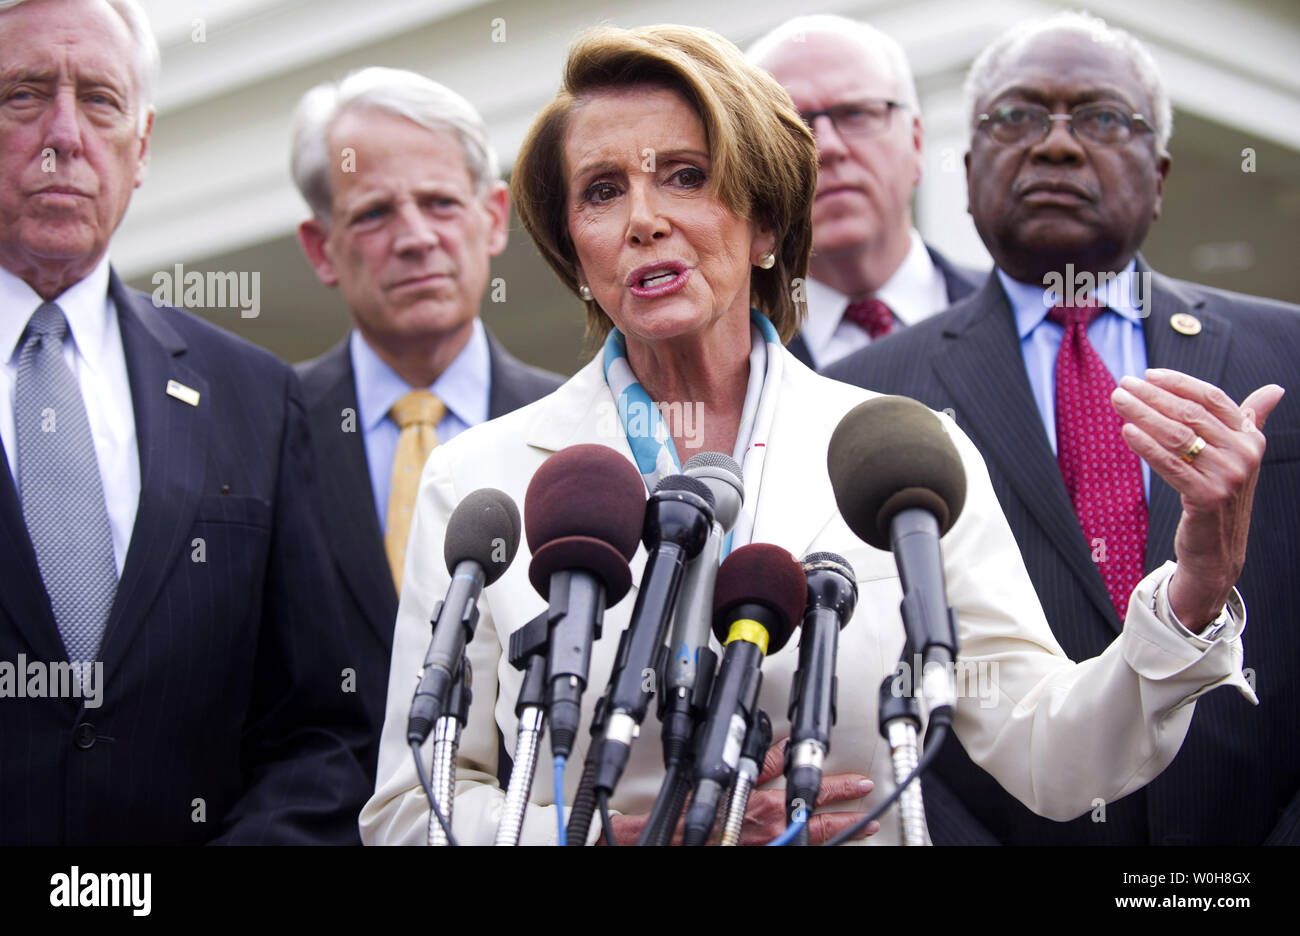 House Minority Leader Nancy Pelosi (D-CA) speaks to the media following a meeting with President Barack Obama on the debt limit and reopening the government at the White House in Washington, D.C. on October 15, 2013. Pelosi was joined by House Minority Whip Steny Hoyer (D-MD) (L), Rep. Steve Israel (D-NY) (2nd-L), Rep. Steve Crowley (D-NY) (2nd-R) and Rep. Jame Clyburn (R-SC). UPI/Kevin Dietsch Stock Photo